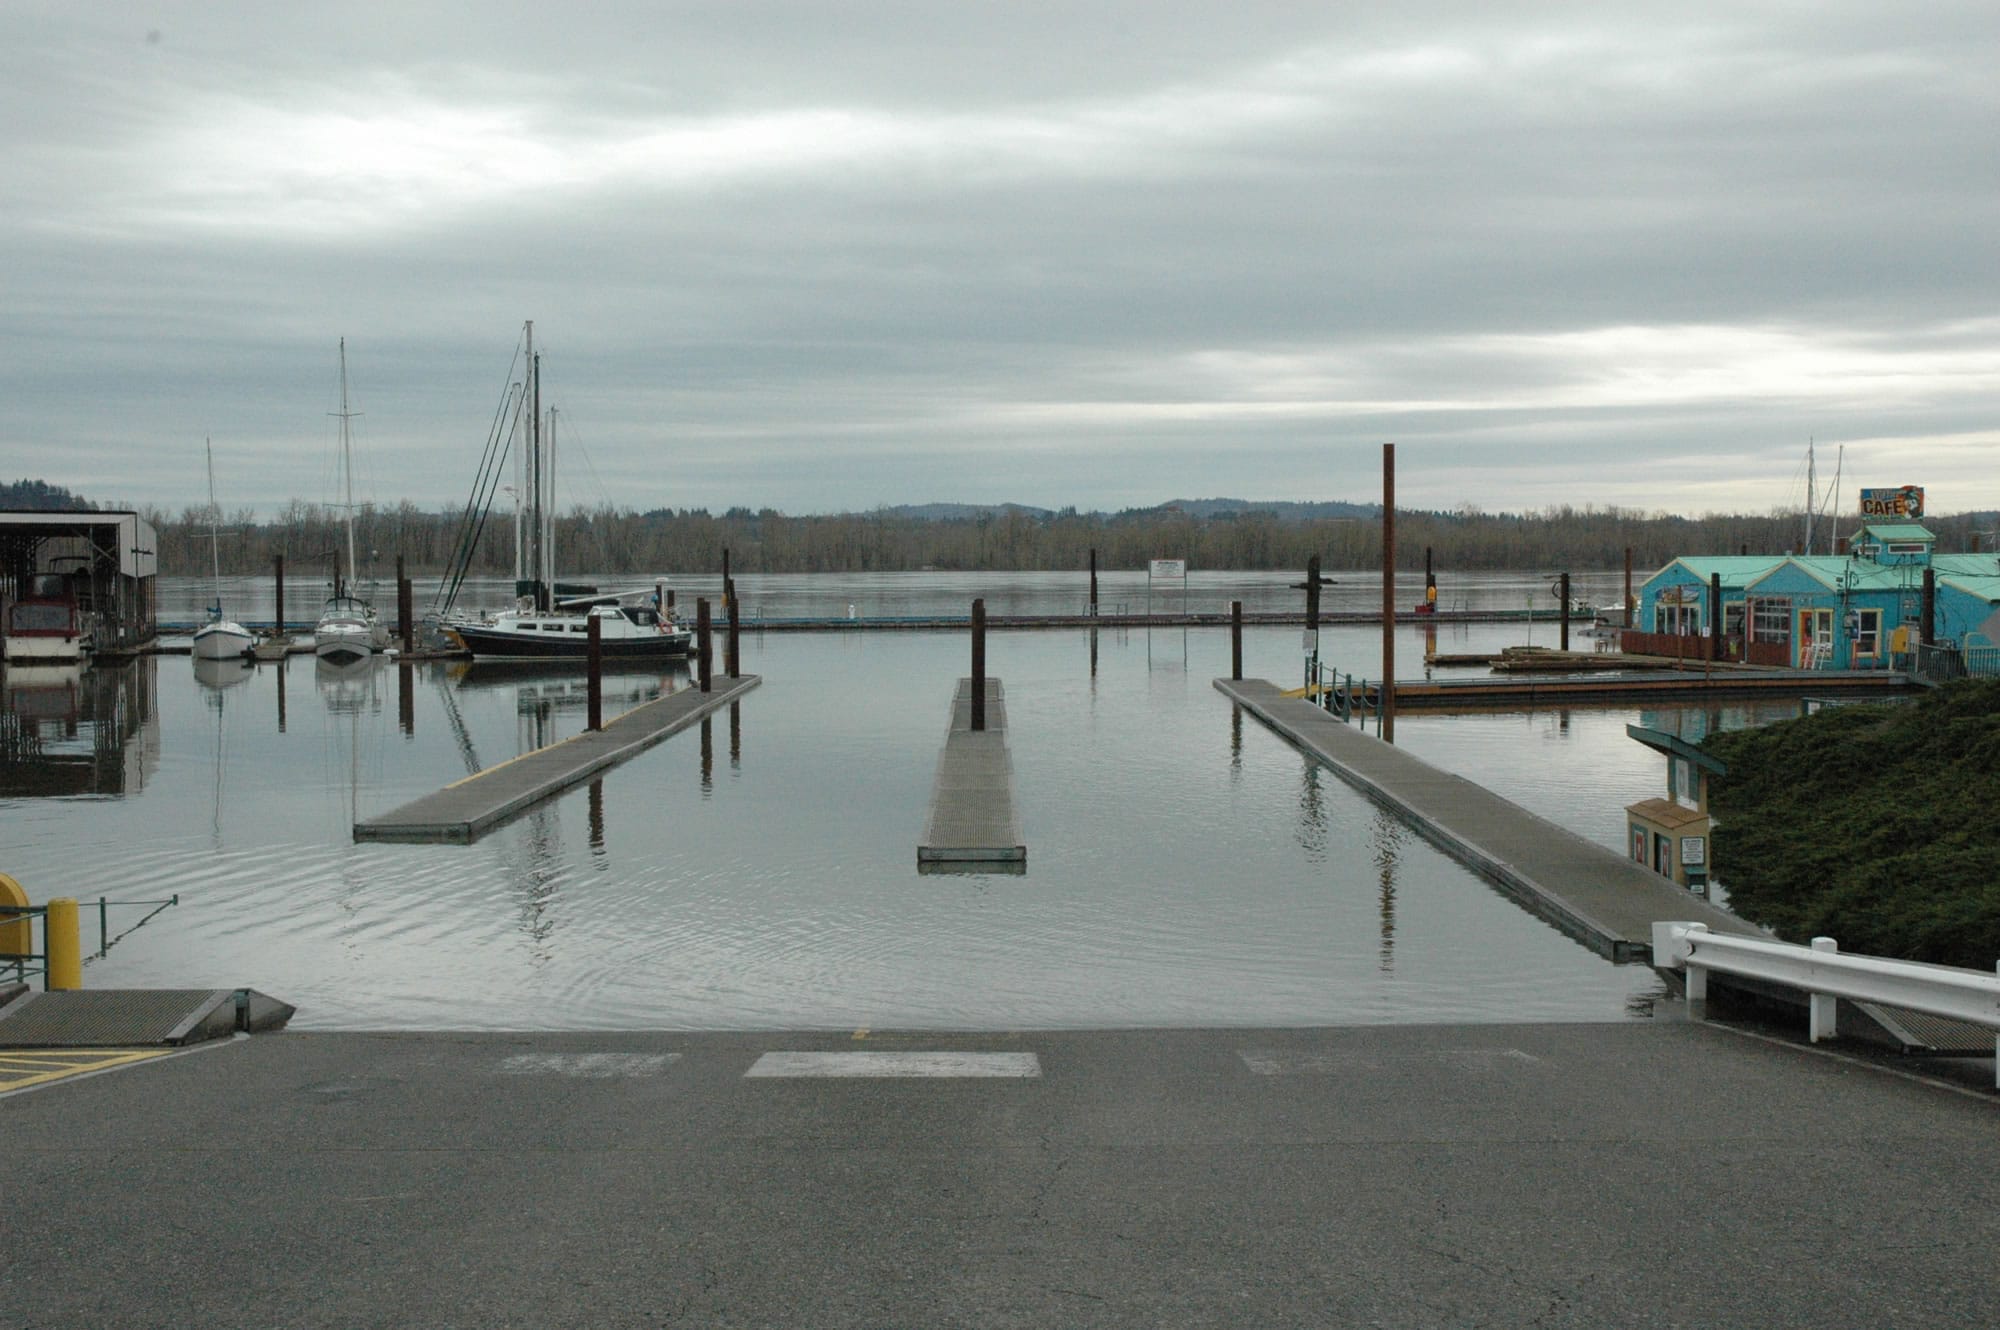 High flows in the Columbia River limit use of floating docks at the Port of Camas-Washougal marina to a single lane.